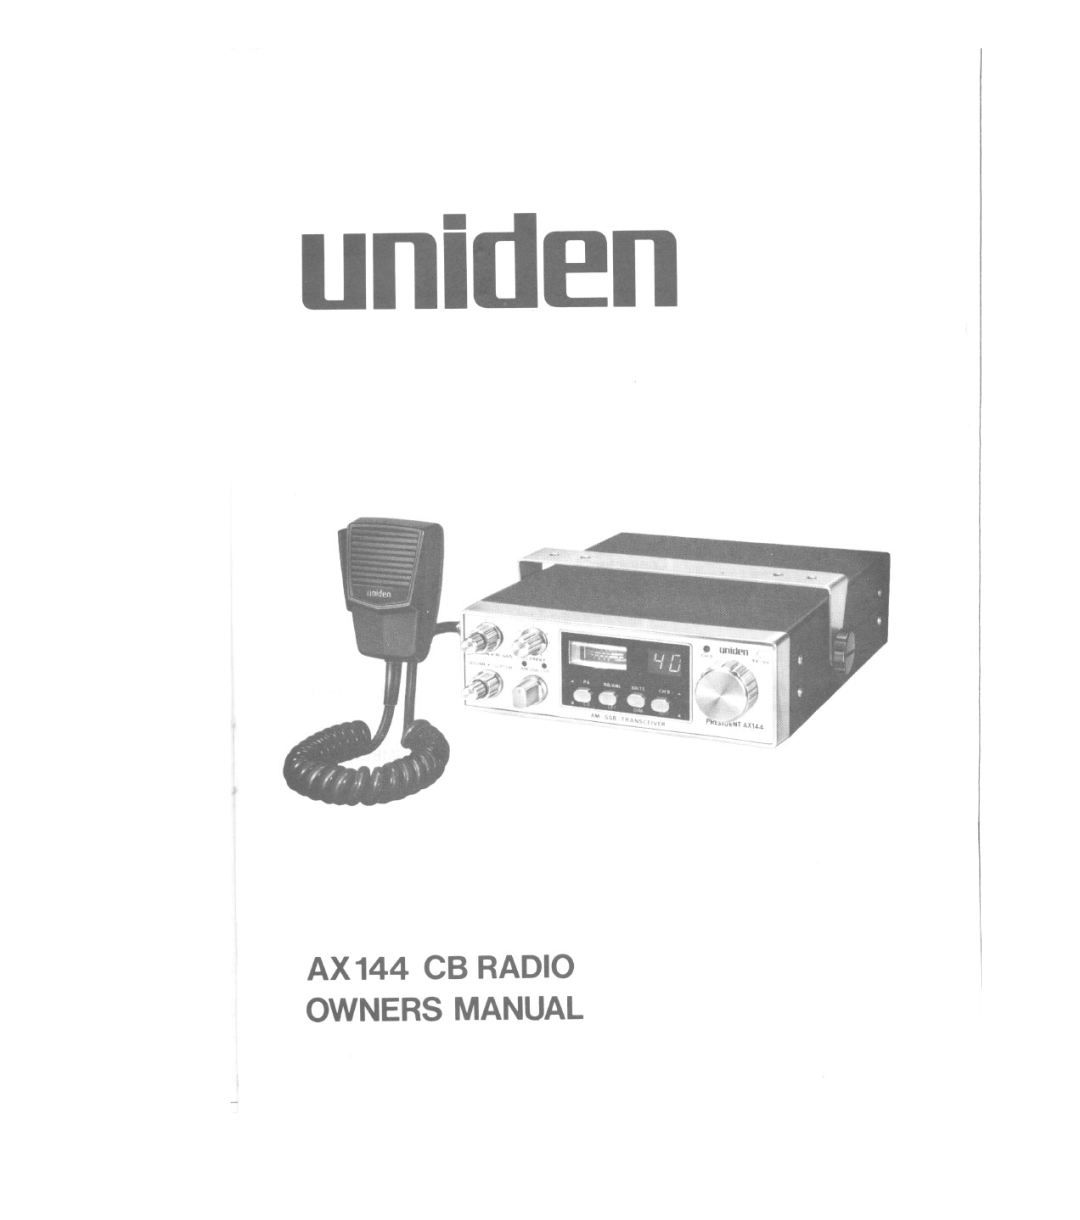 Uniden owner manual uniden, AX 144 CB RADIO OWNERS MANUAL 